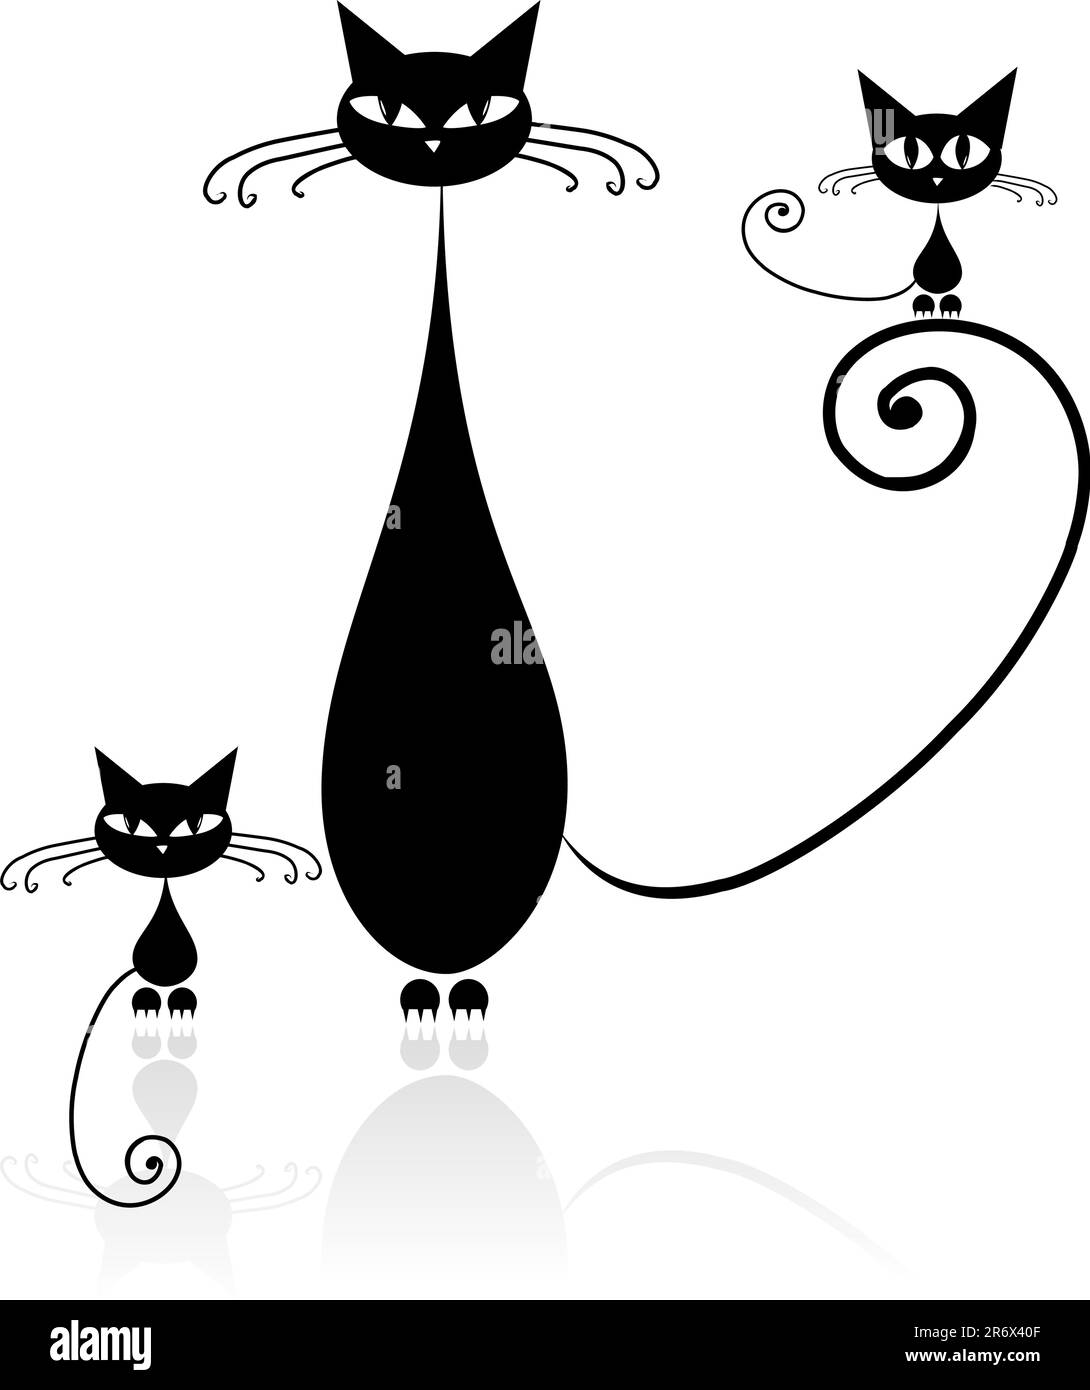 Black cat silhouette for your design Stock Vector